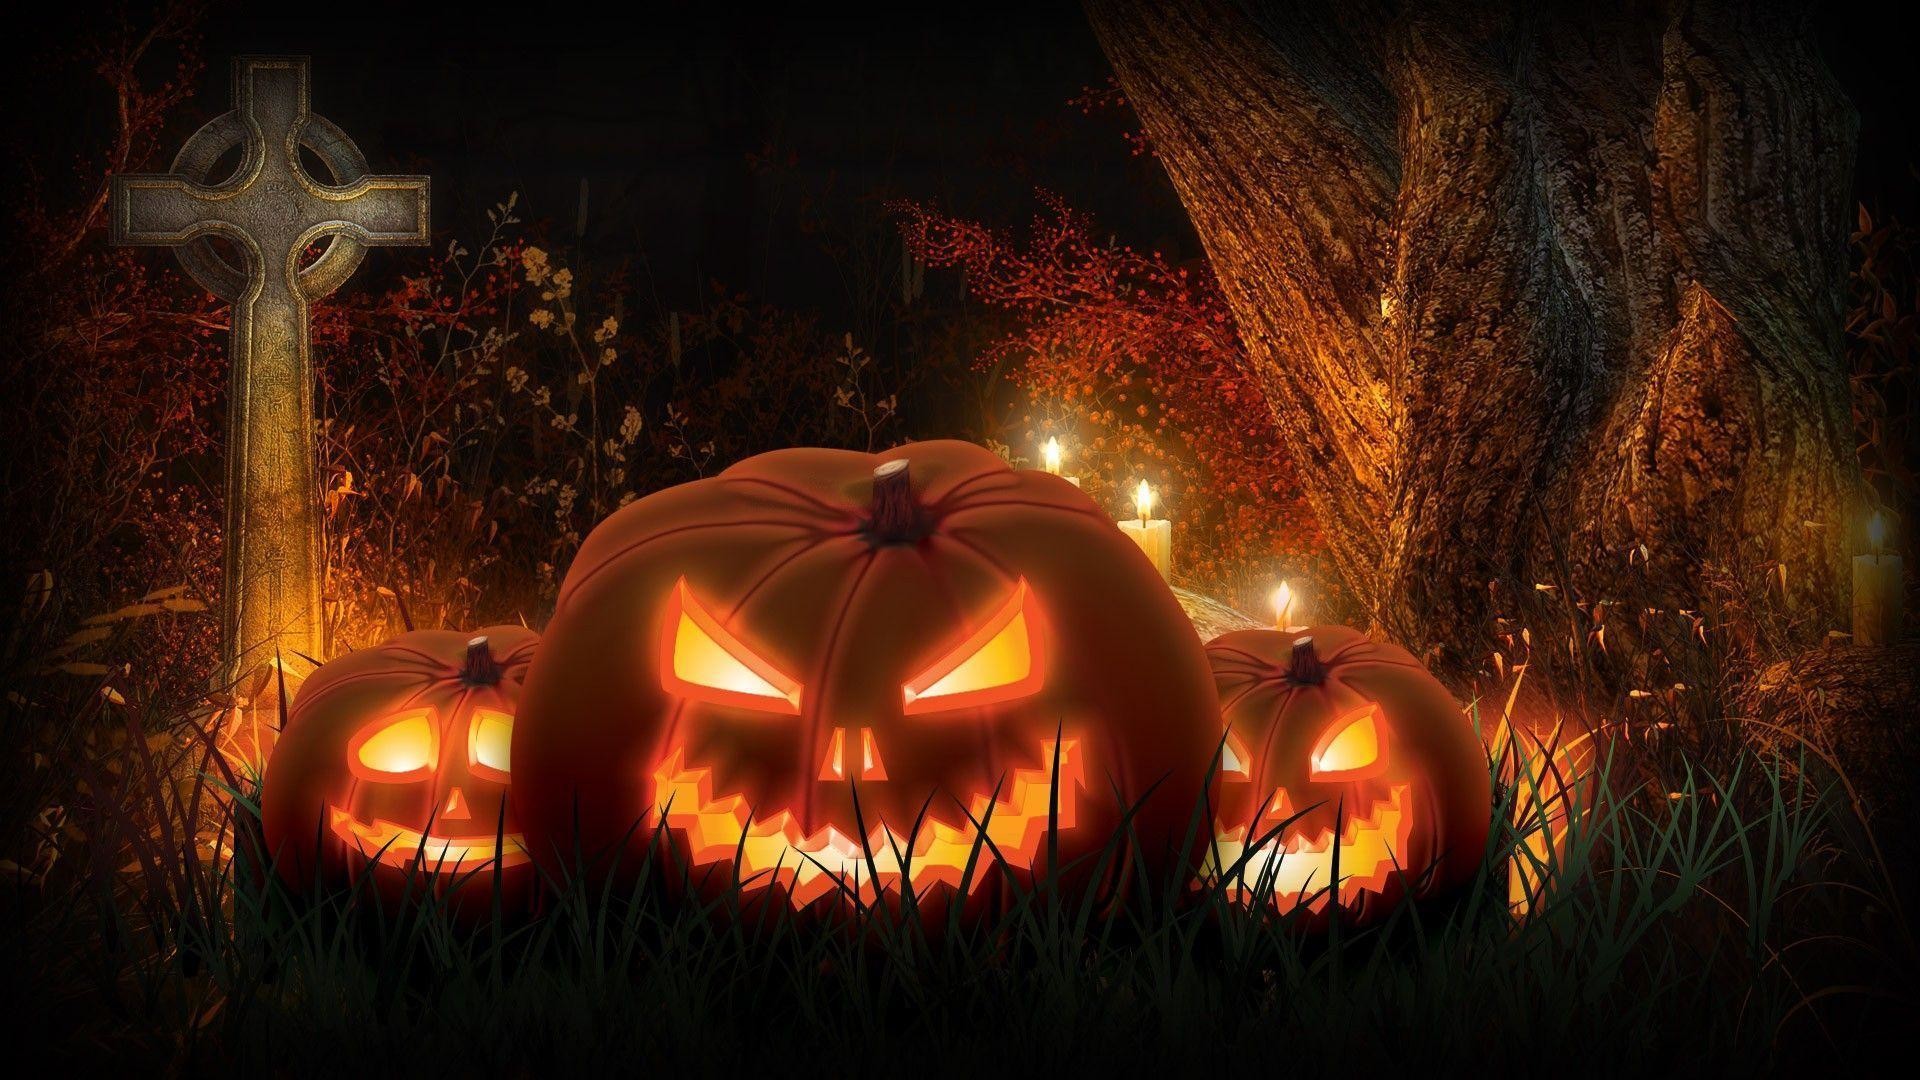 HD Halloween Wallpapers 1080p (77+ images)